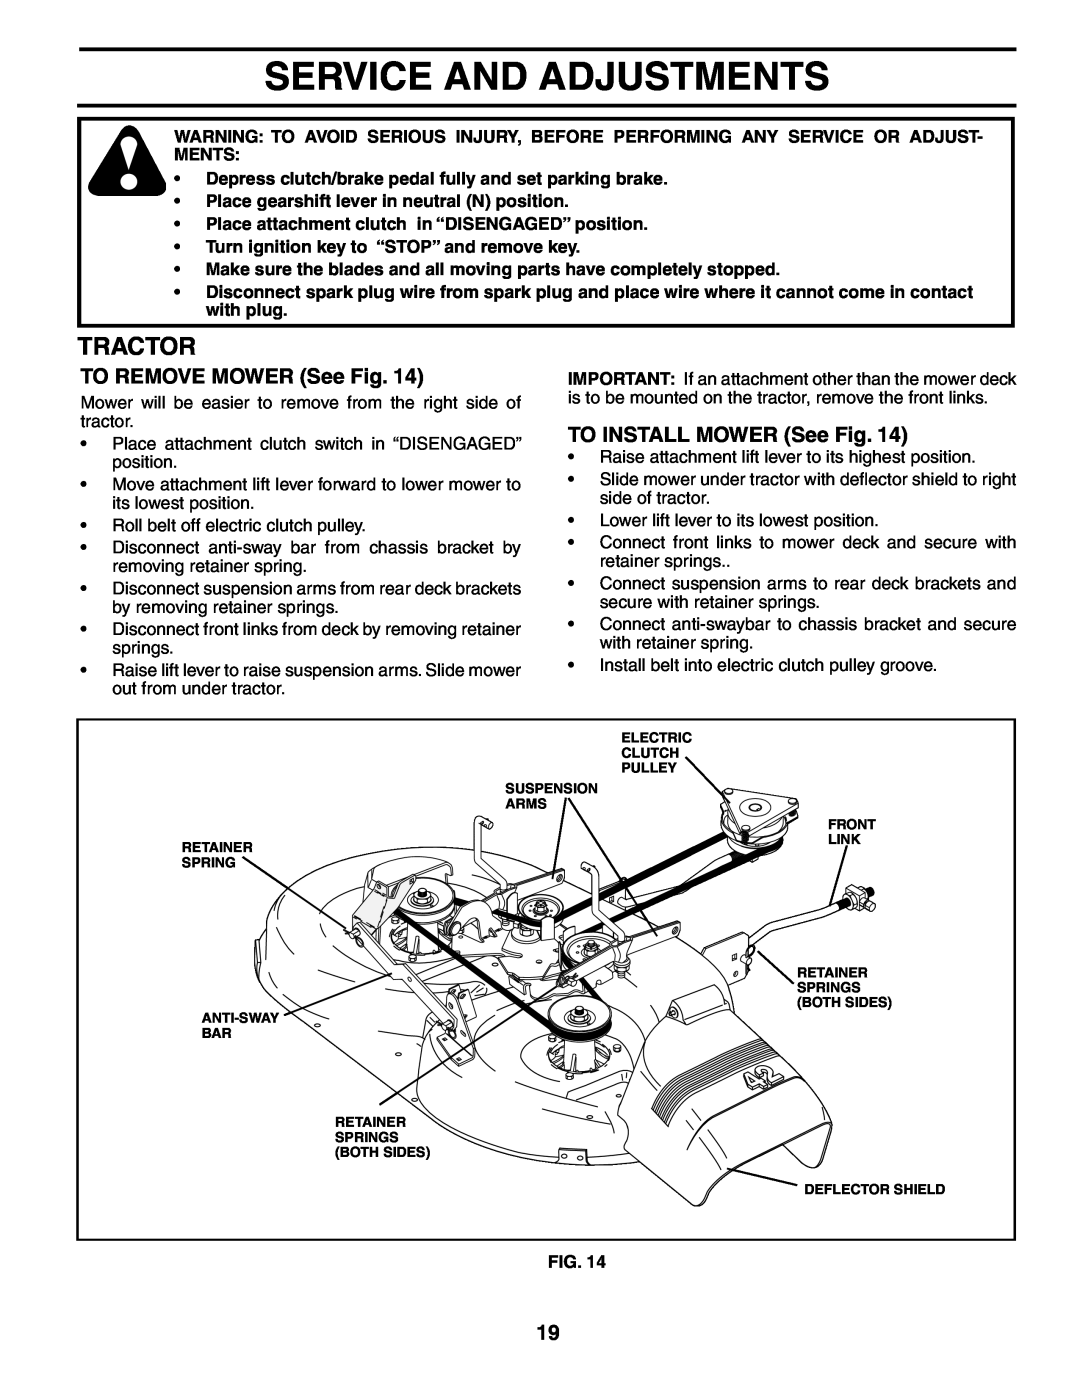 Poulan 194993 manual Service And Adjustments, TO REMOVE MOWER See Fig, TO INSTALL MOWER See Fig, Tractor 